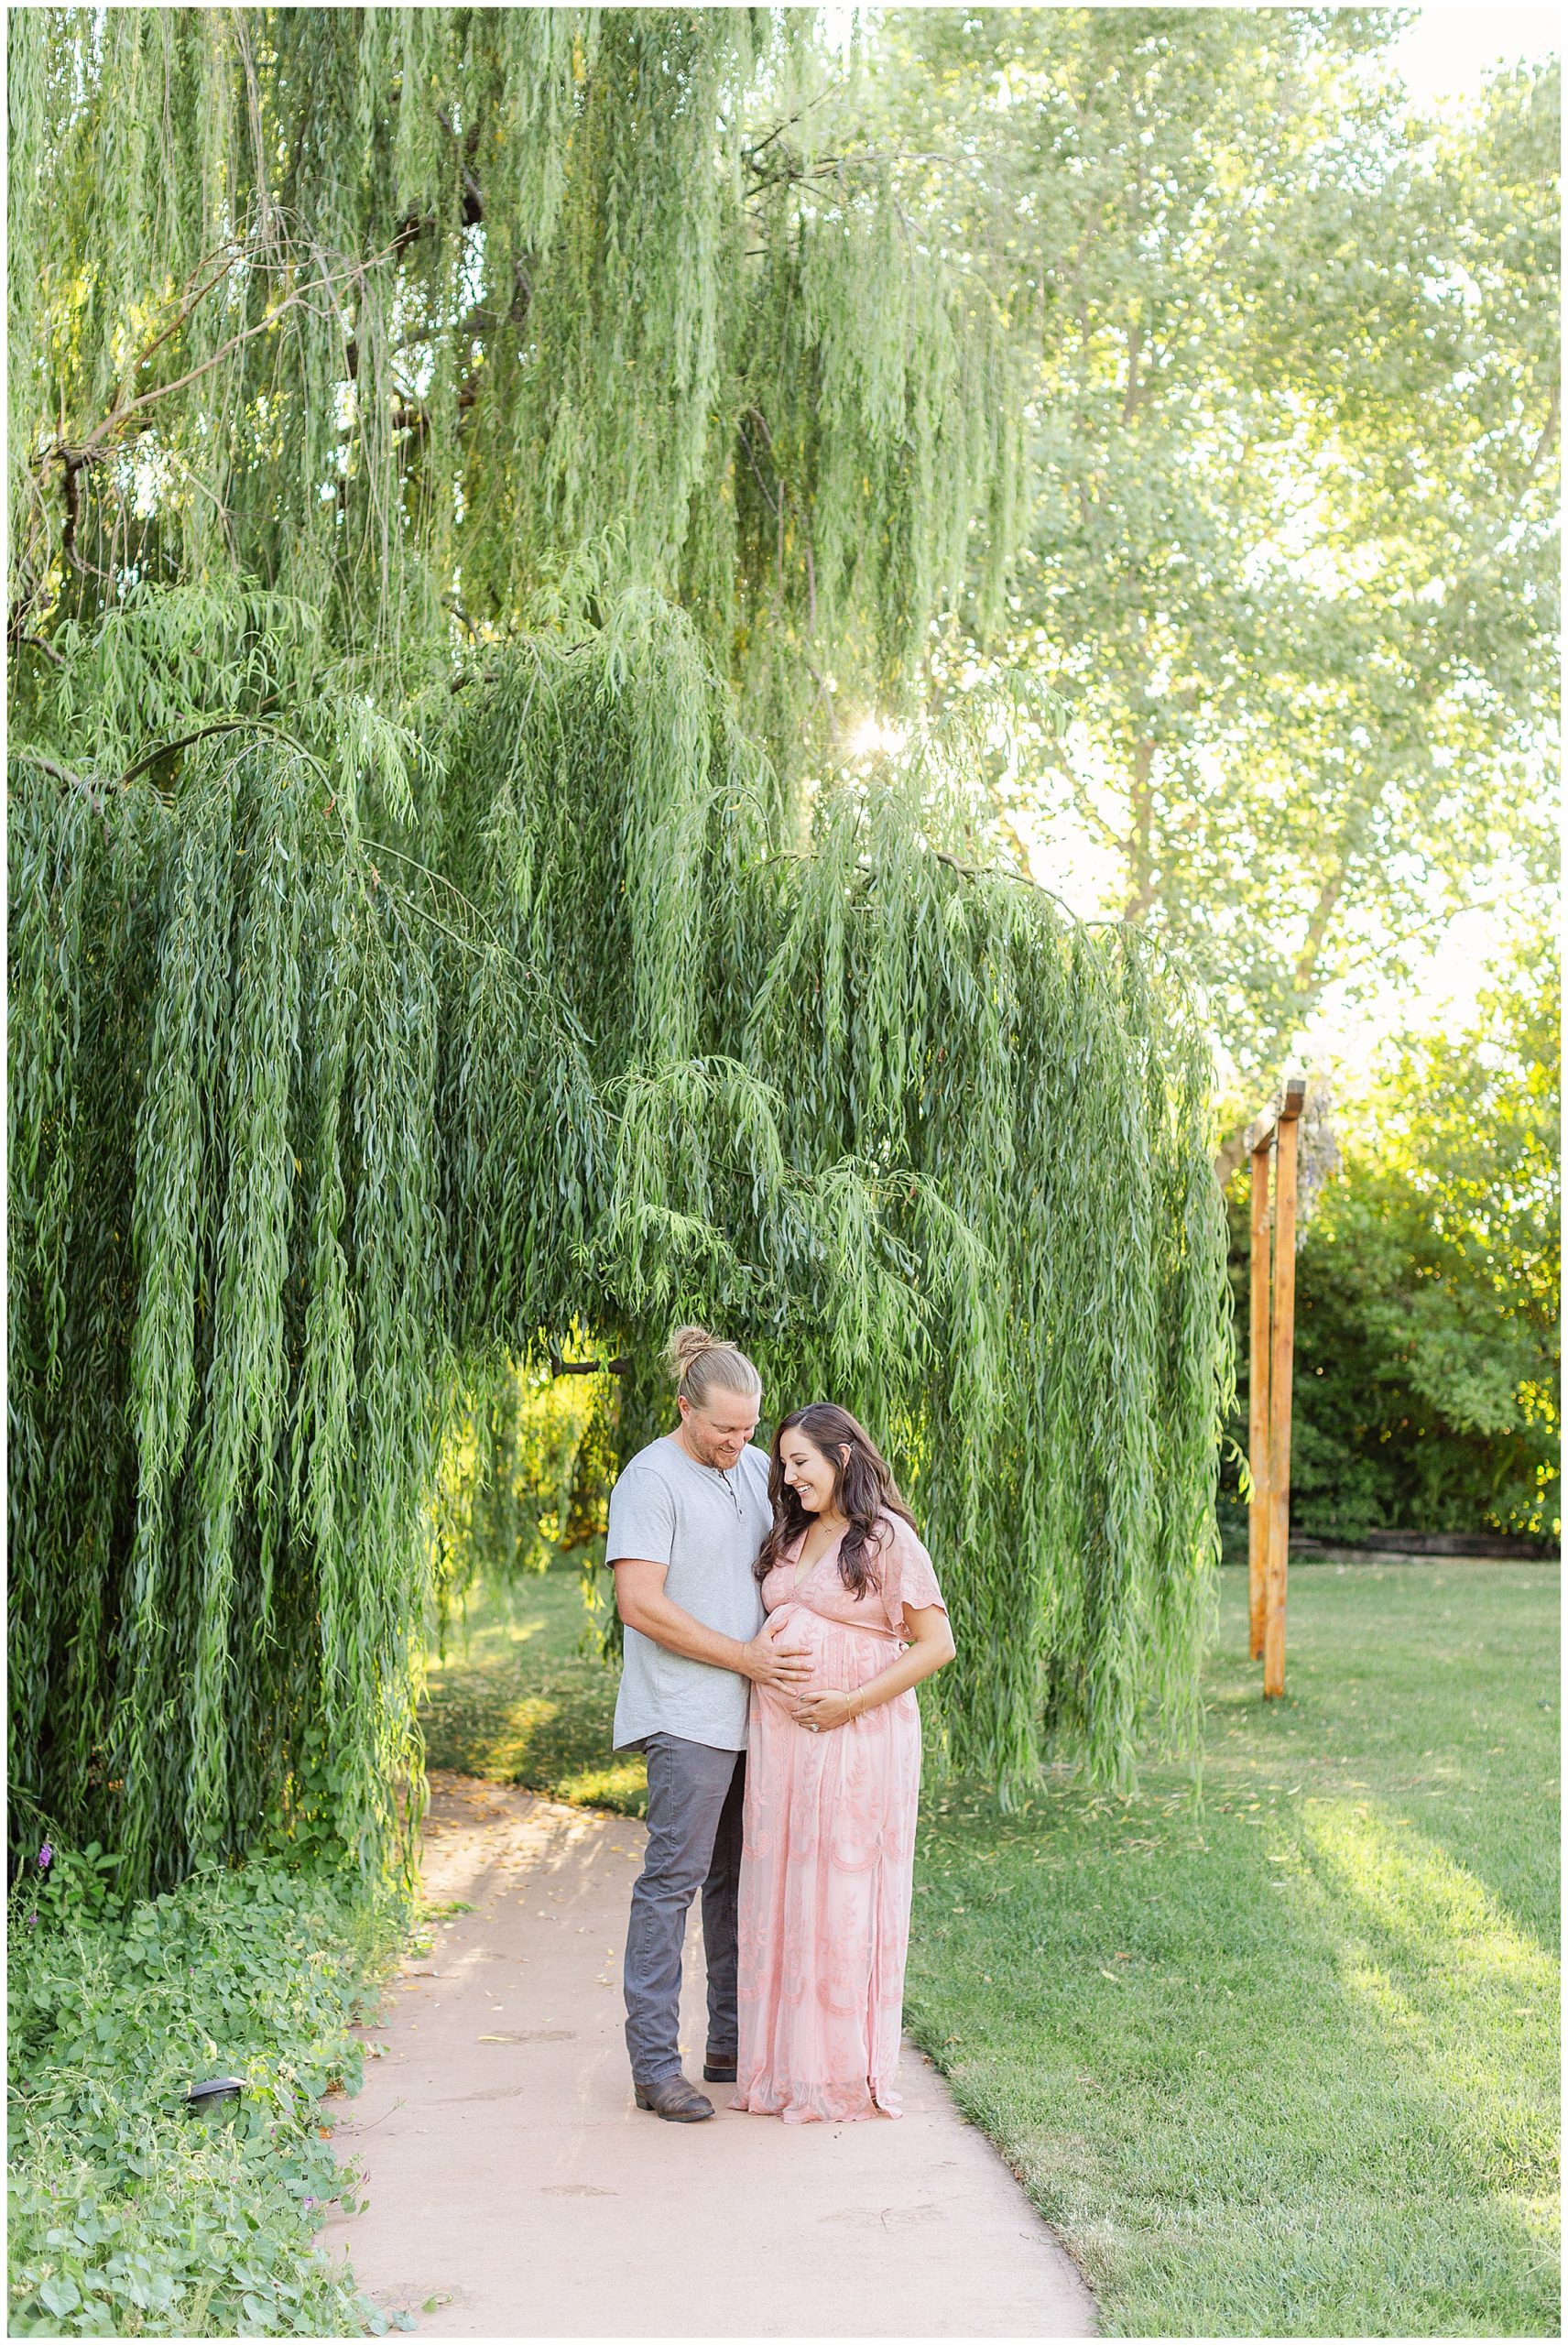 Maternity Session Under Willow Tree at White Ranch Events | Jessekah + Andy